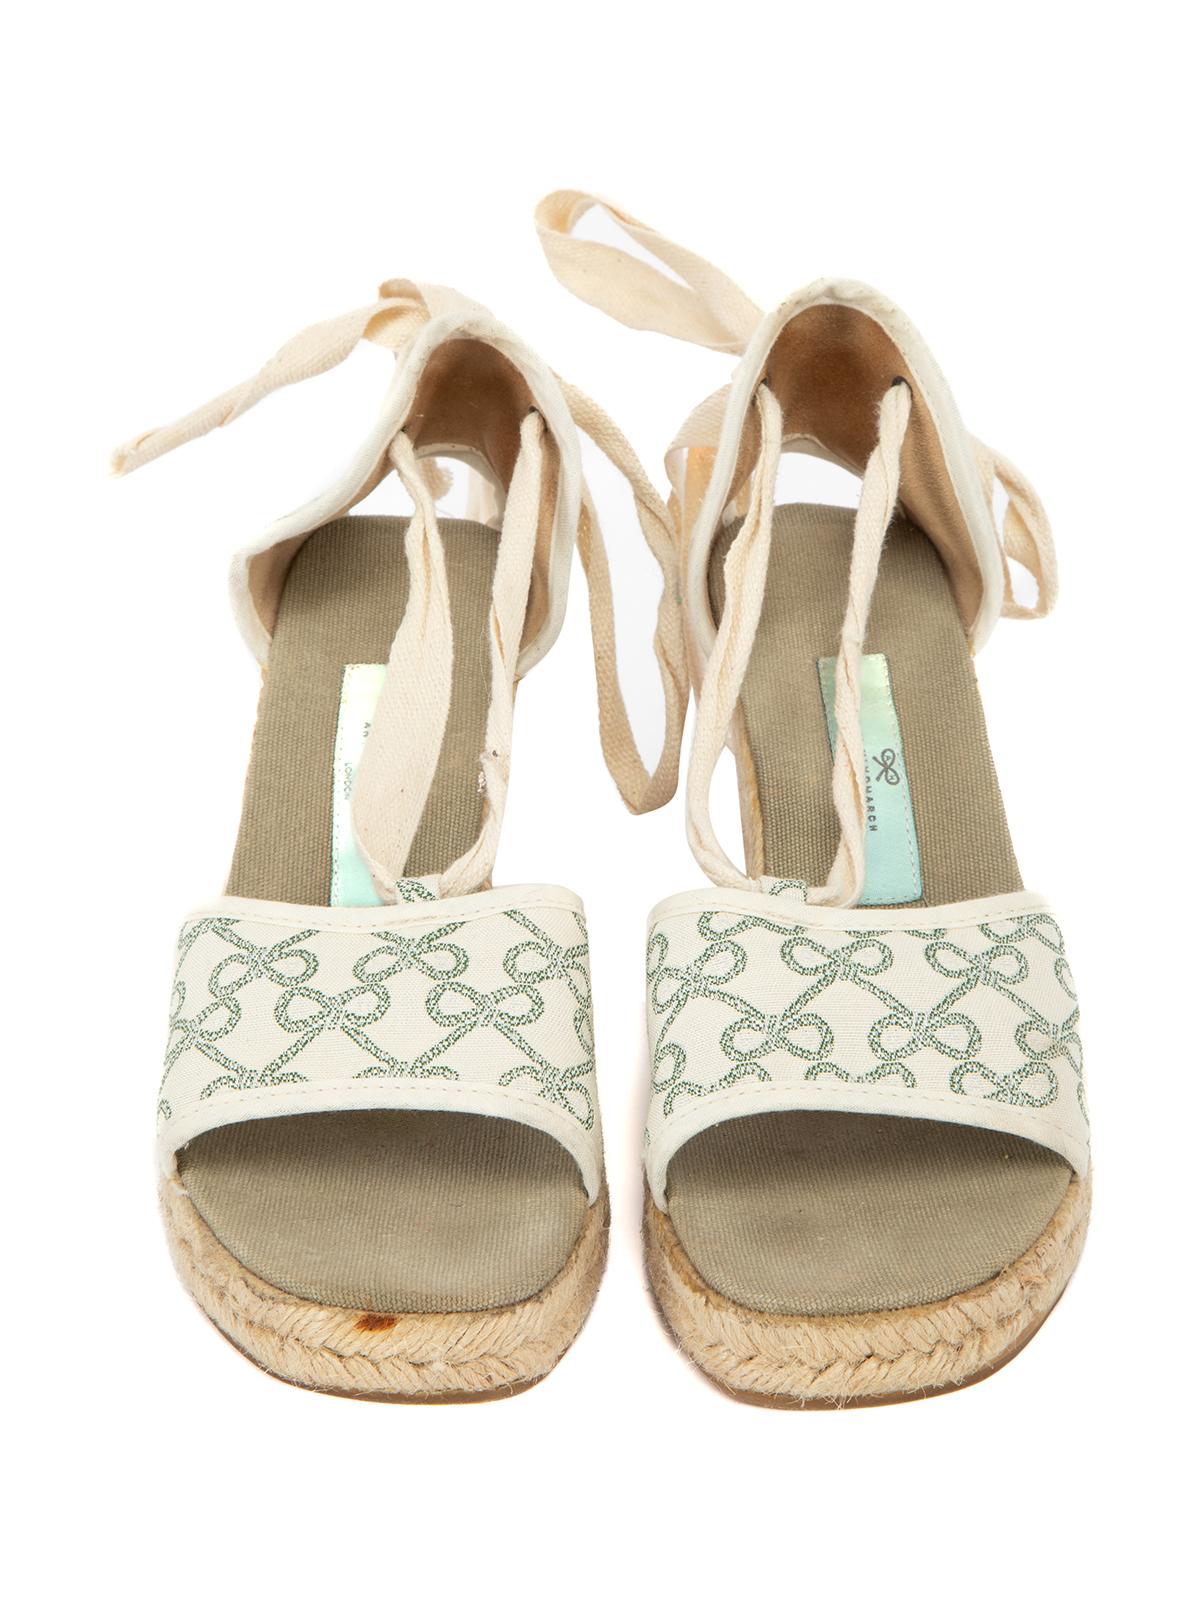 Anya Hindmarch Women's Bow Tie Print Wedge Espadrilles In Good Condition For Sale In London, GB